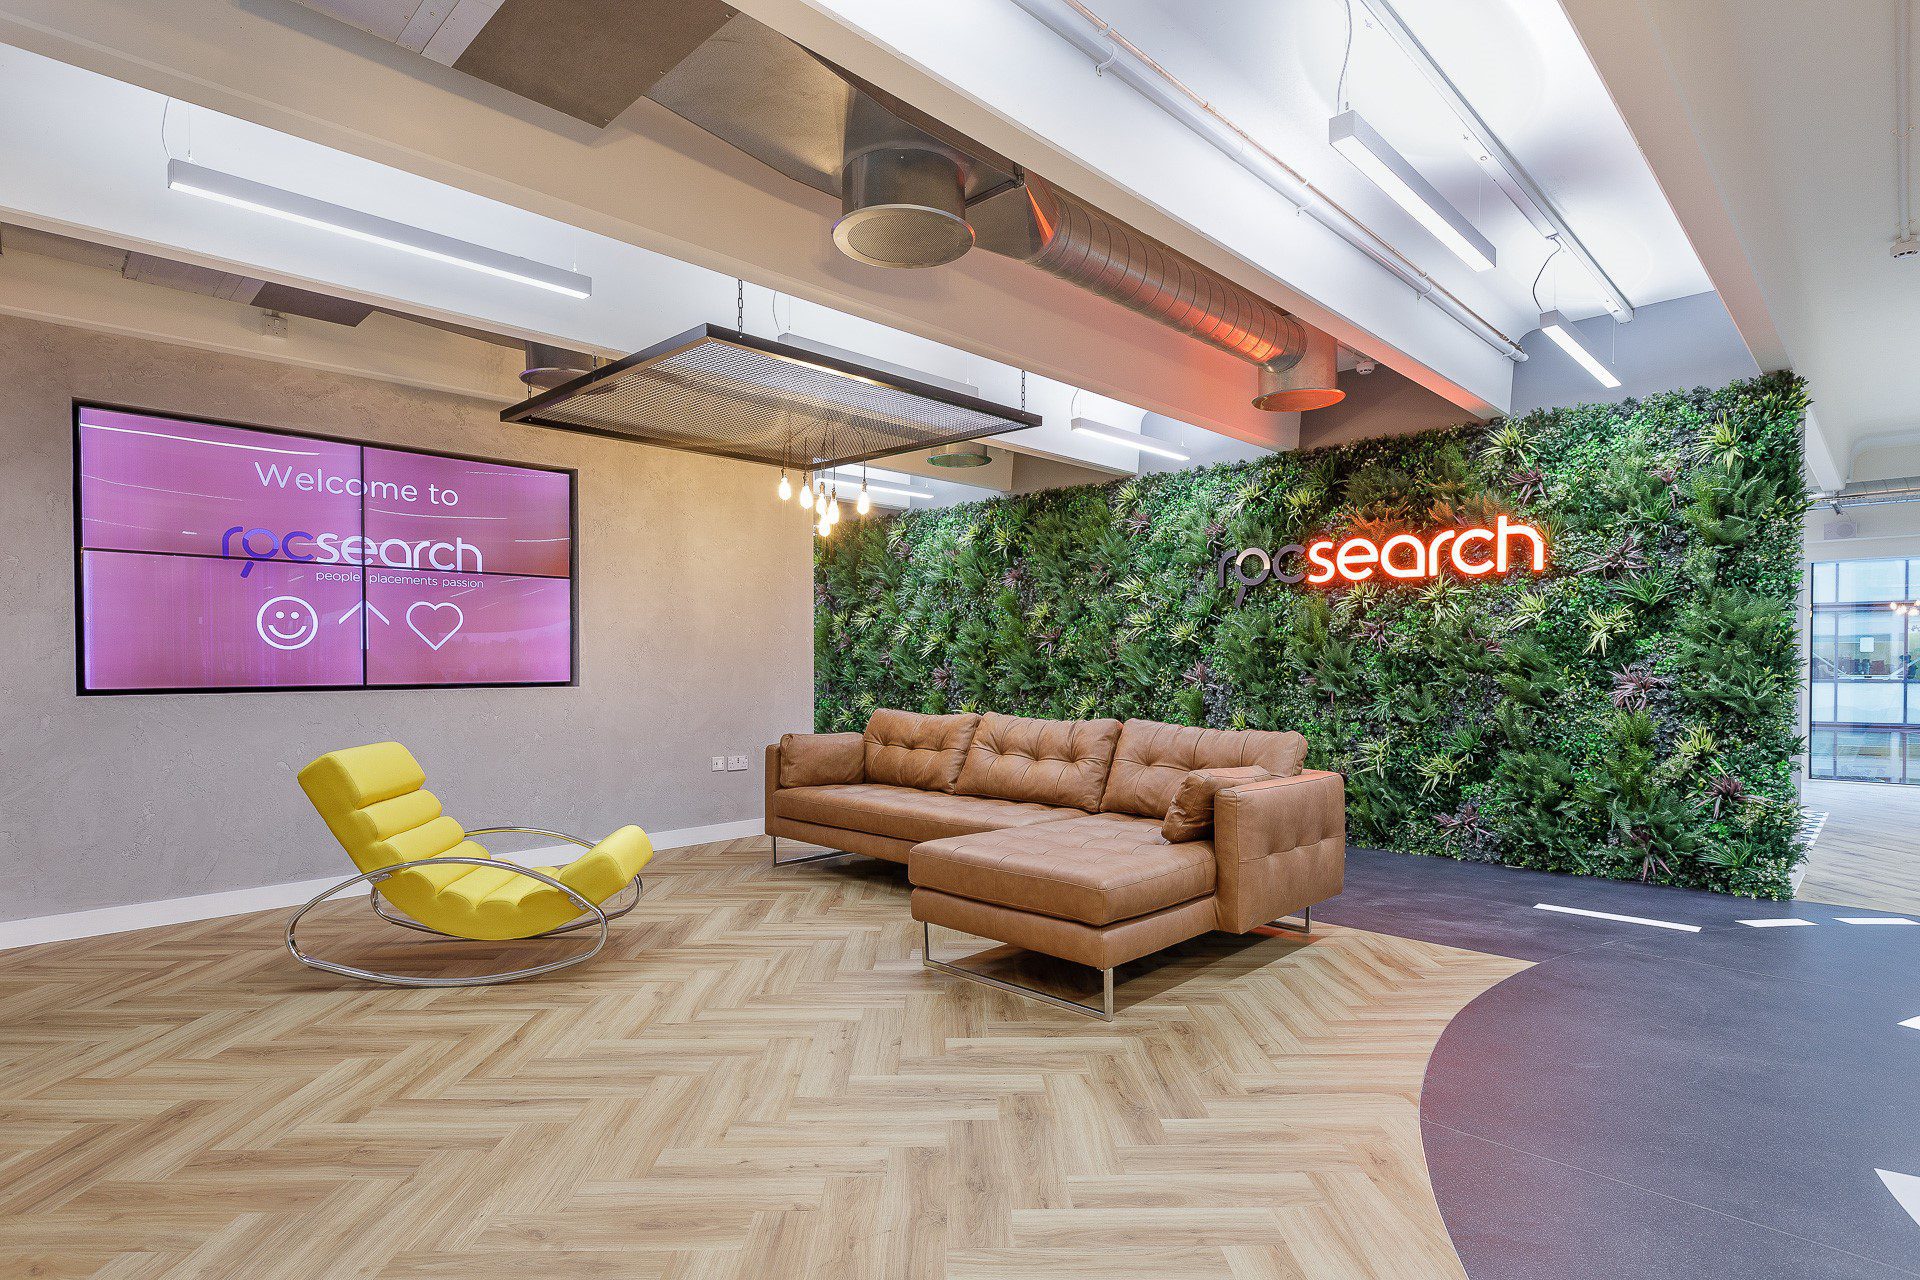 Roch-search trendy office with artificial green wall